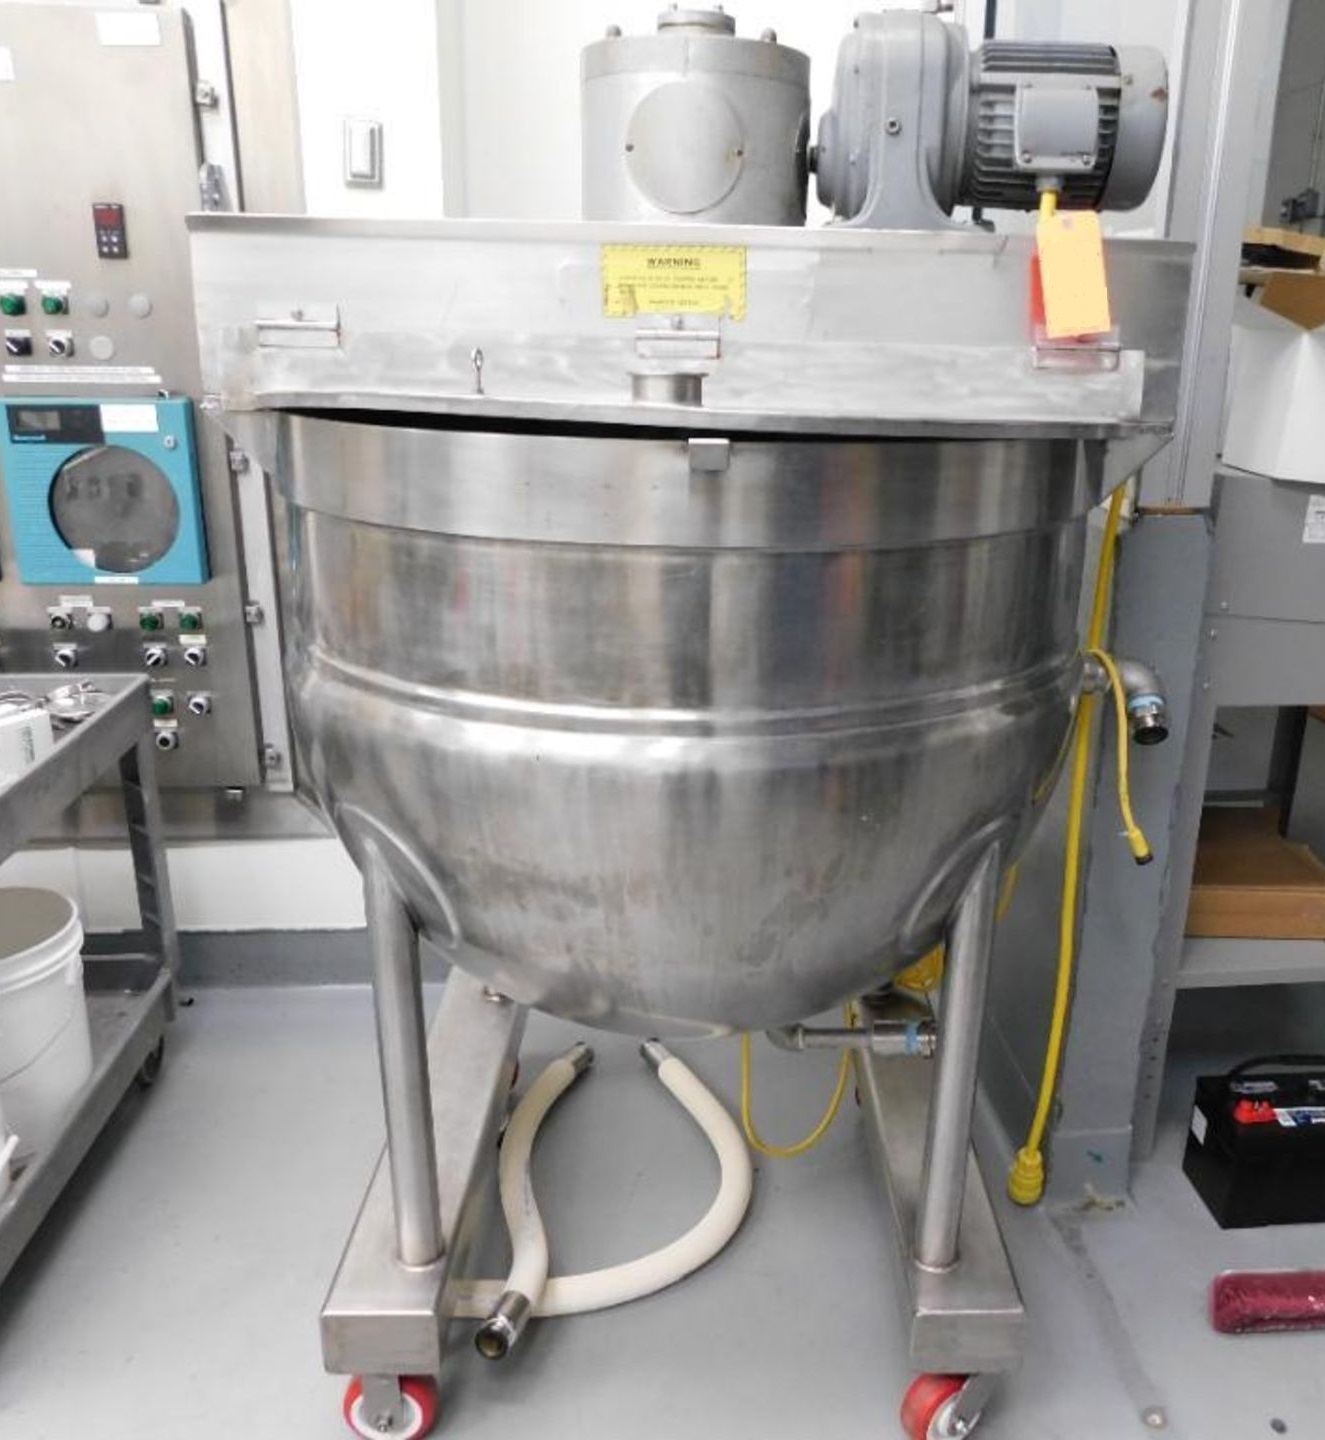 150 Gallon Jacketed Double Motion Mix Kettle.  Built by JC Pardo.  Rated 125 PSI @ 350 Deg.F. Portable on wheels.  Hinged lids.  No scrapper blades.  Last used in Sanitary Pharmaceutical application.